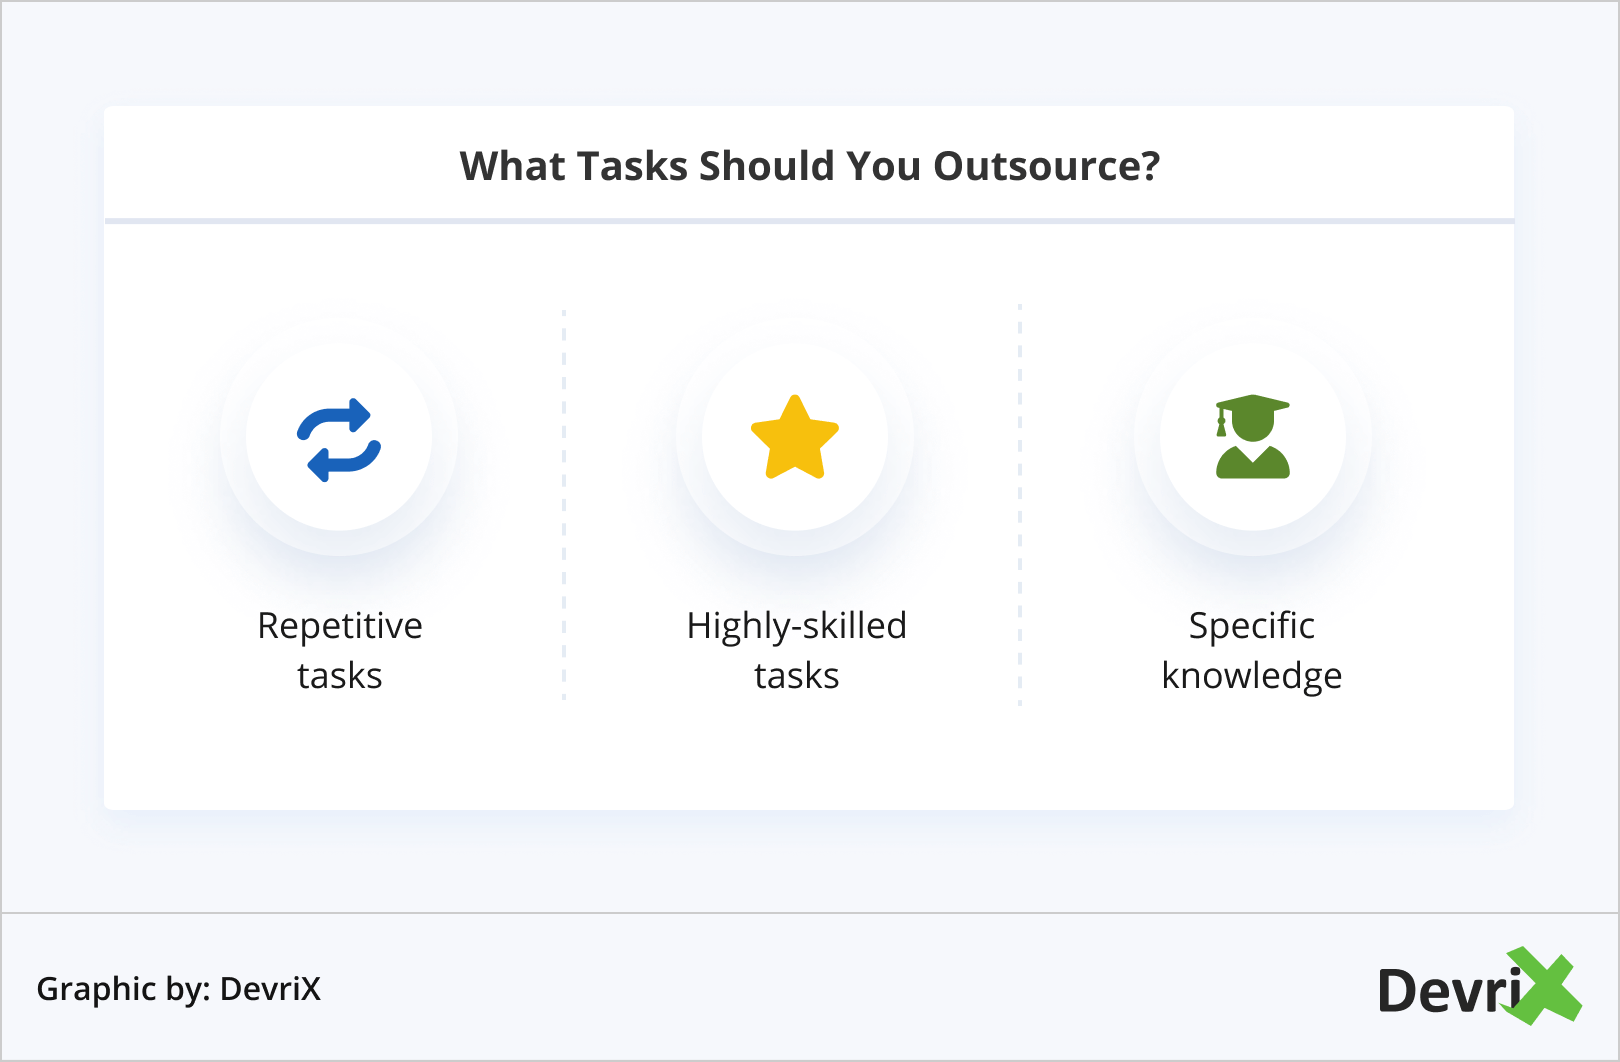 What Tasks Should You Outsource